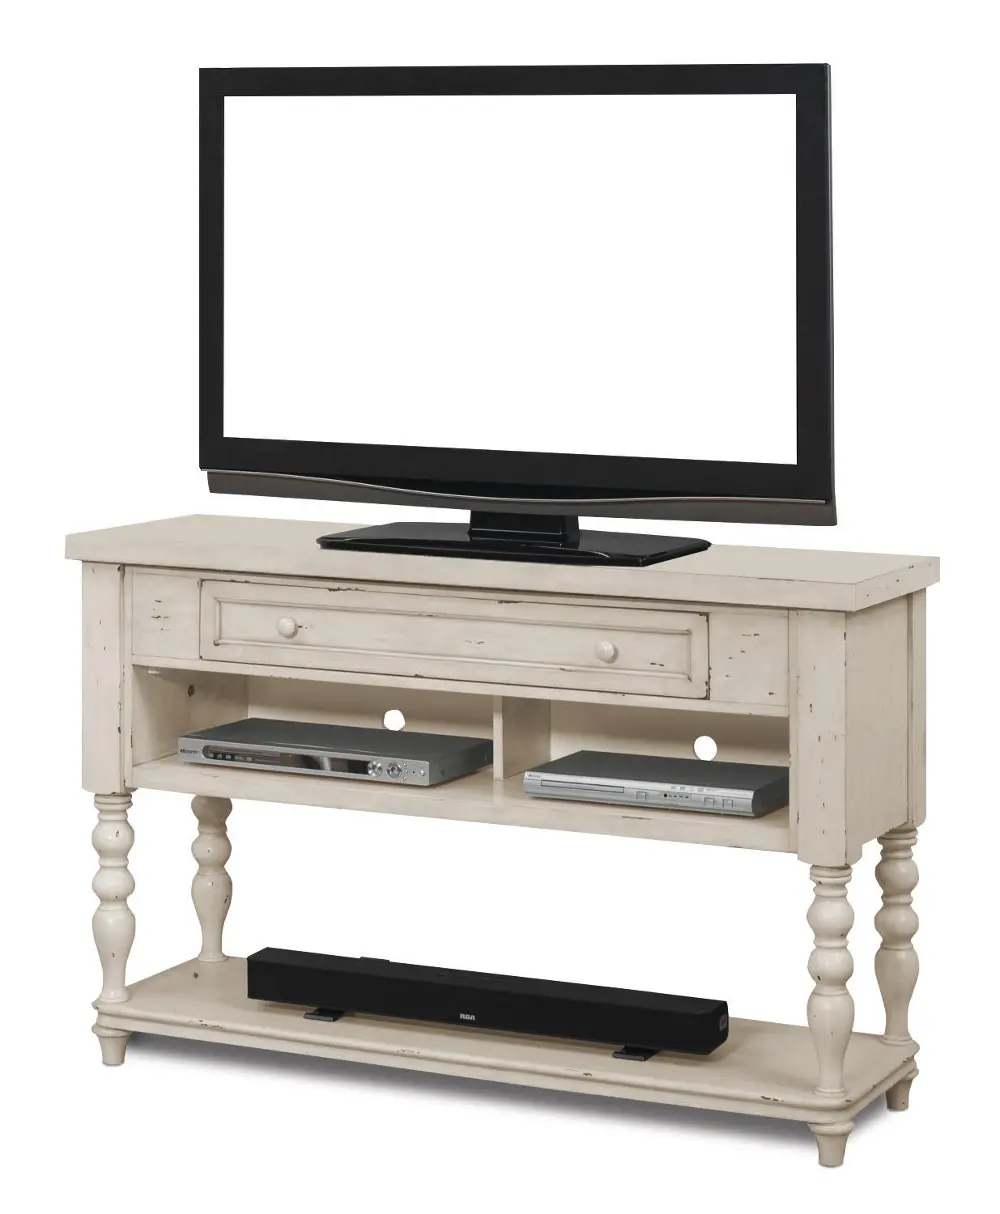 50 Inch Antique White TV Stand - Weatherby-1